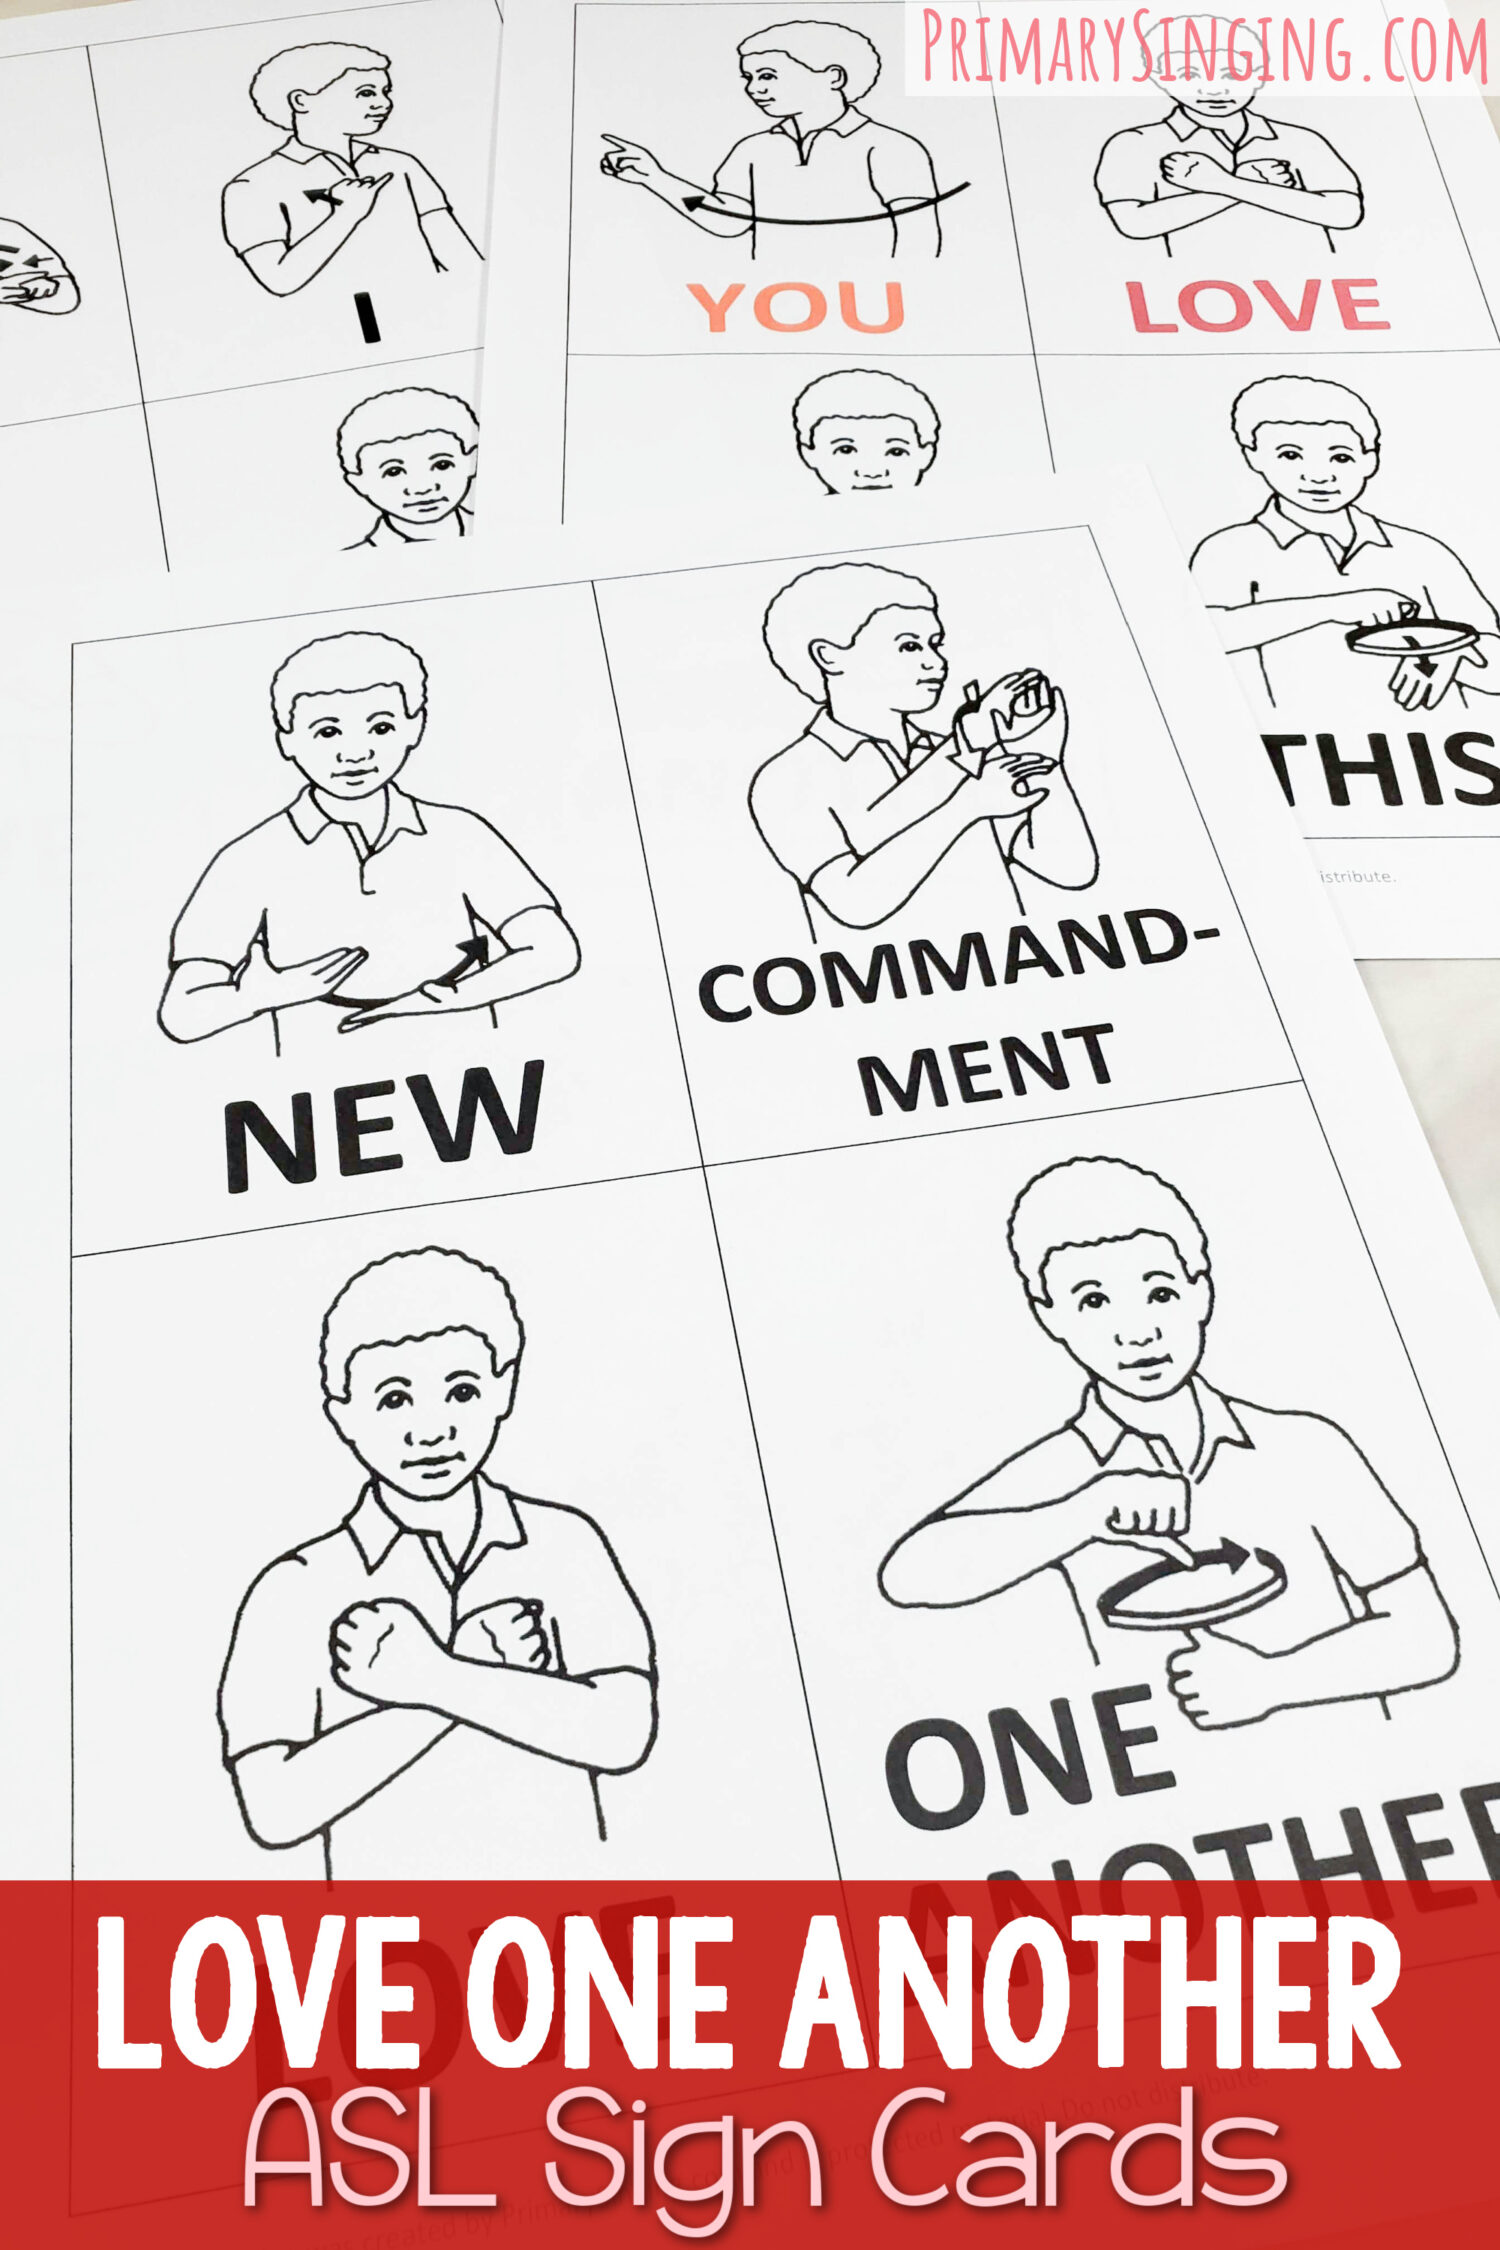 Love One Another ASL Sign language cards - fun and easy singing time idea for LDS Primary music leaders to teach this song with signs to add movement and meaning to the lyrics. Plus lots of fun ideas to mix up this activity in a new way so it feels fresh and different. 